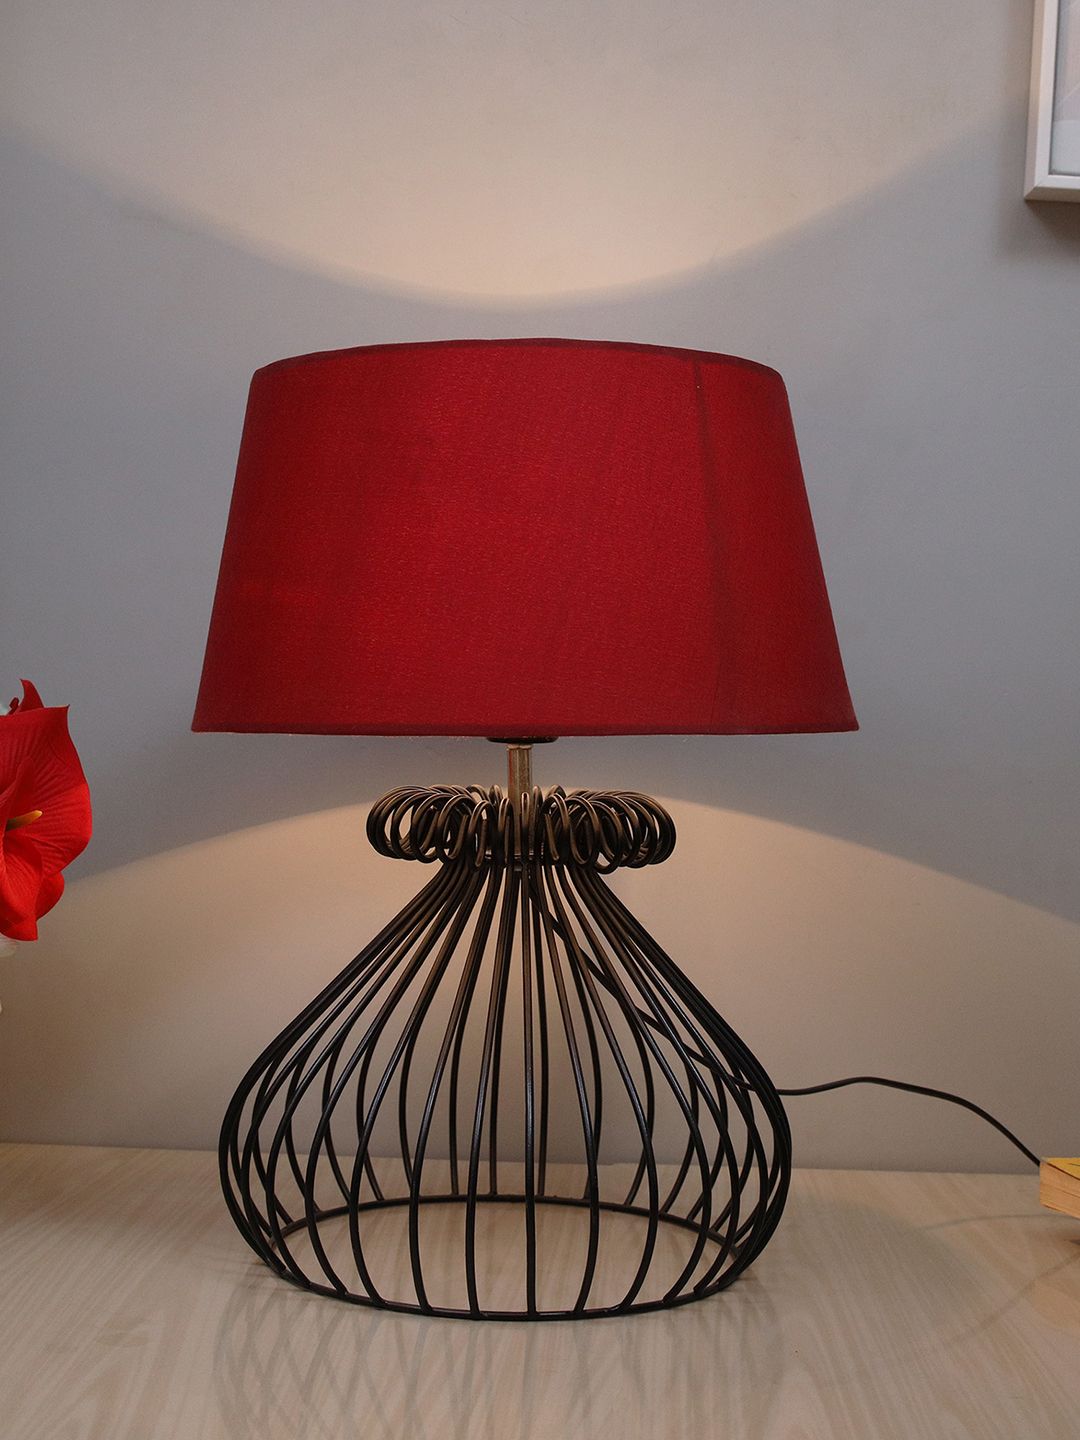 Homesake Black Inverted Cone Table Lamp Hollowed-Out Base With Red Shade Price in India